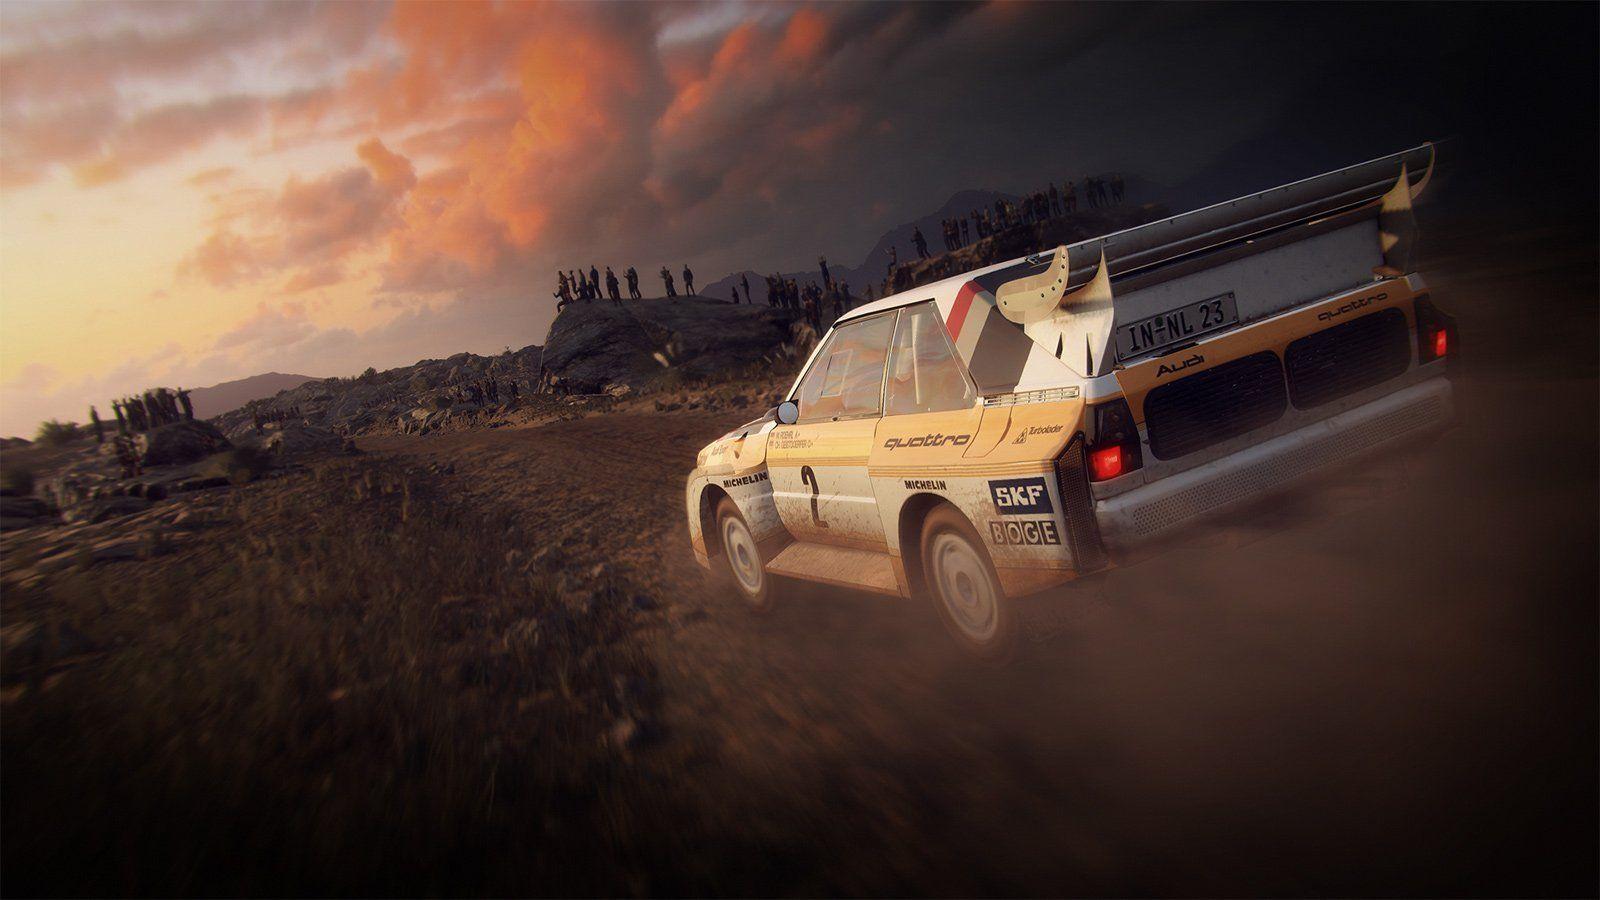 DiRT Rally 2.0 has been announced for PS Xbox One and PC. Trusted